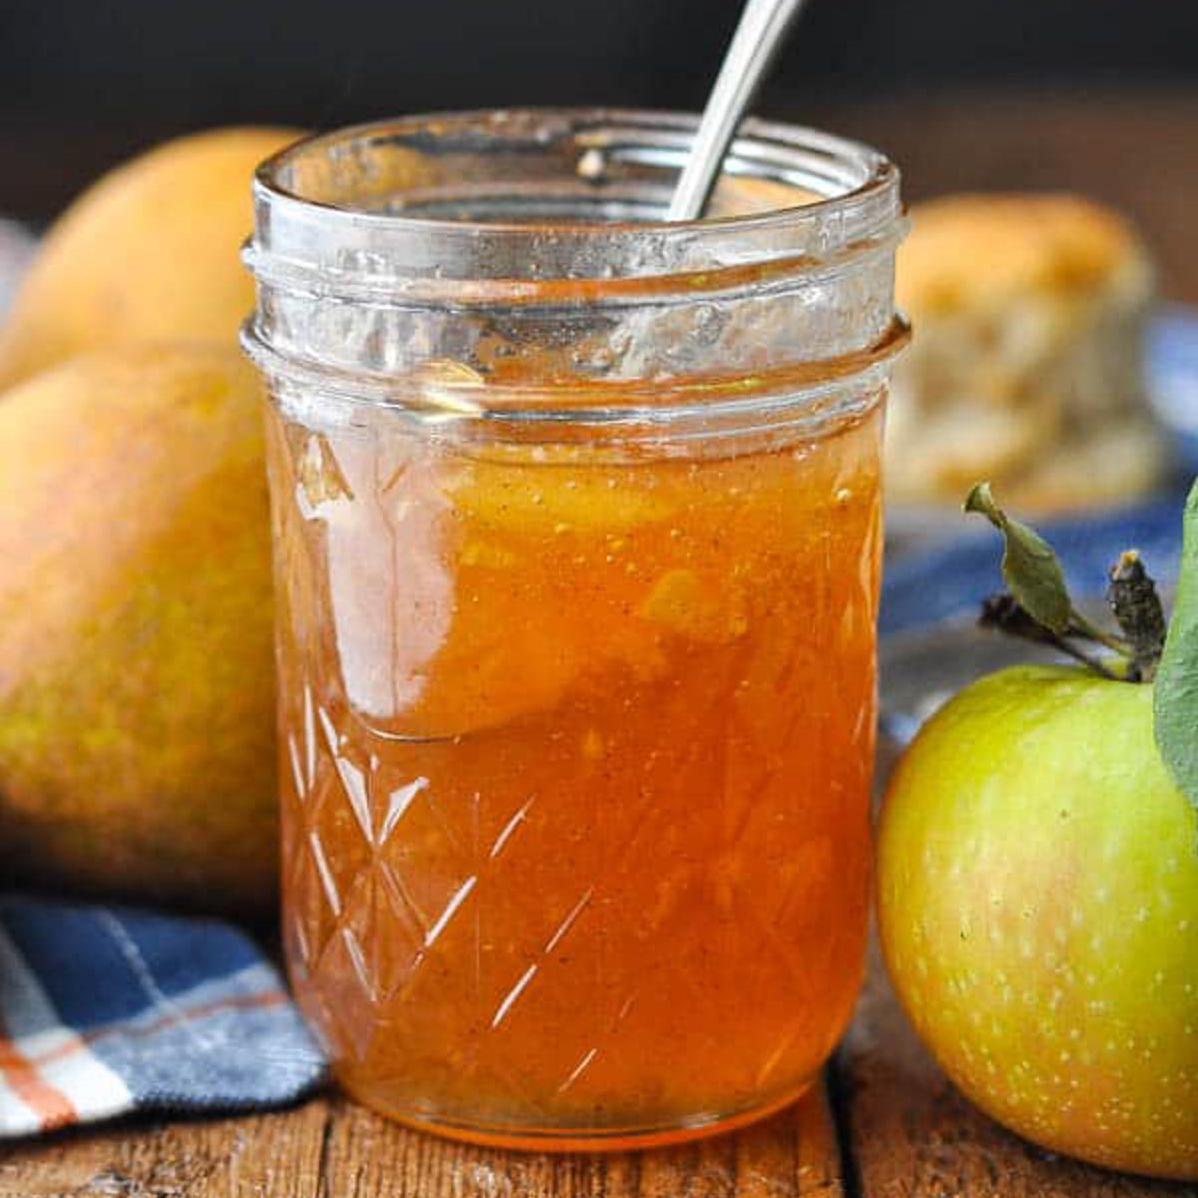  Southern charm in a jar: homemade pear jam